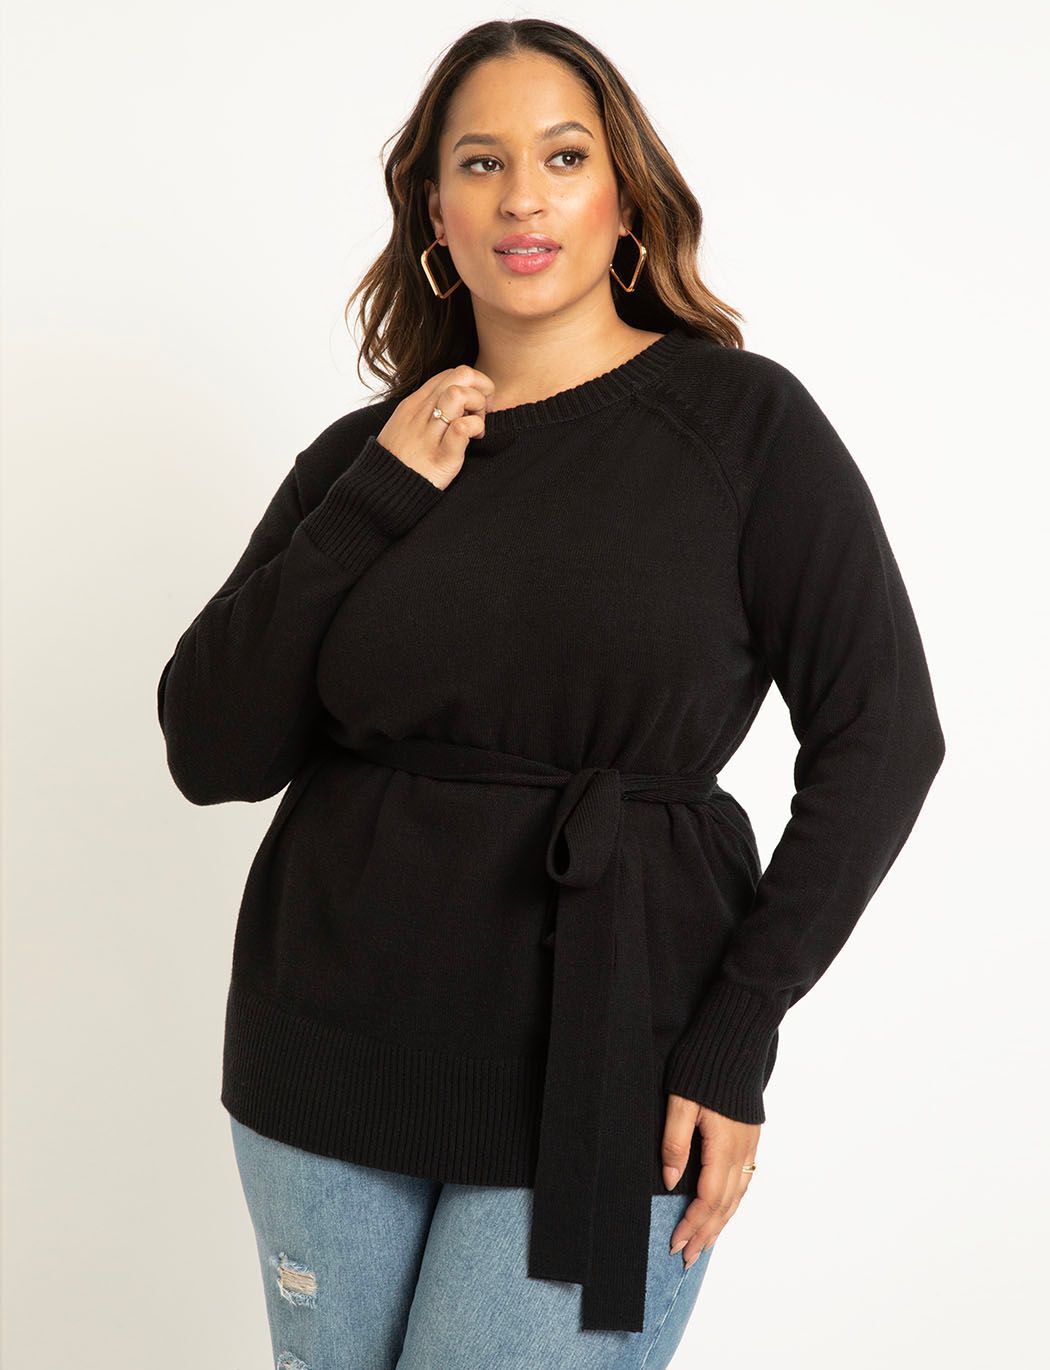 Plus Size Sweater Belted Fitted Ribbed Raglan Sleeves Crew Neck Tunic